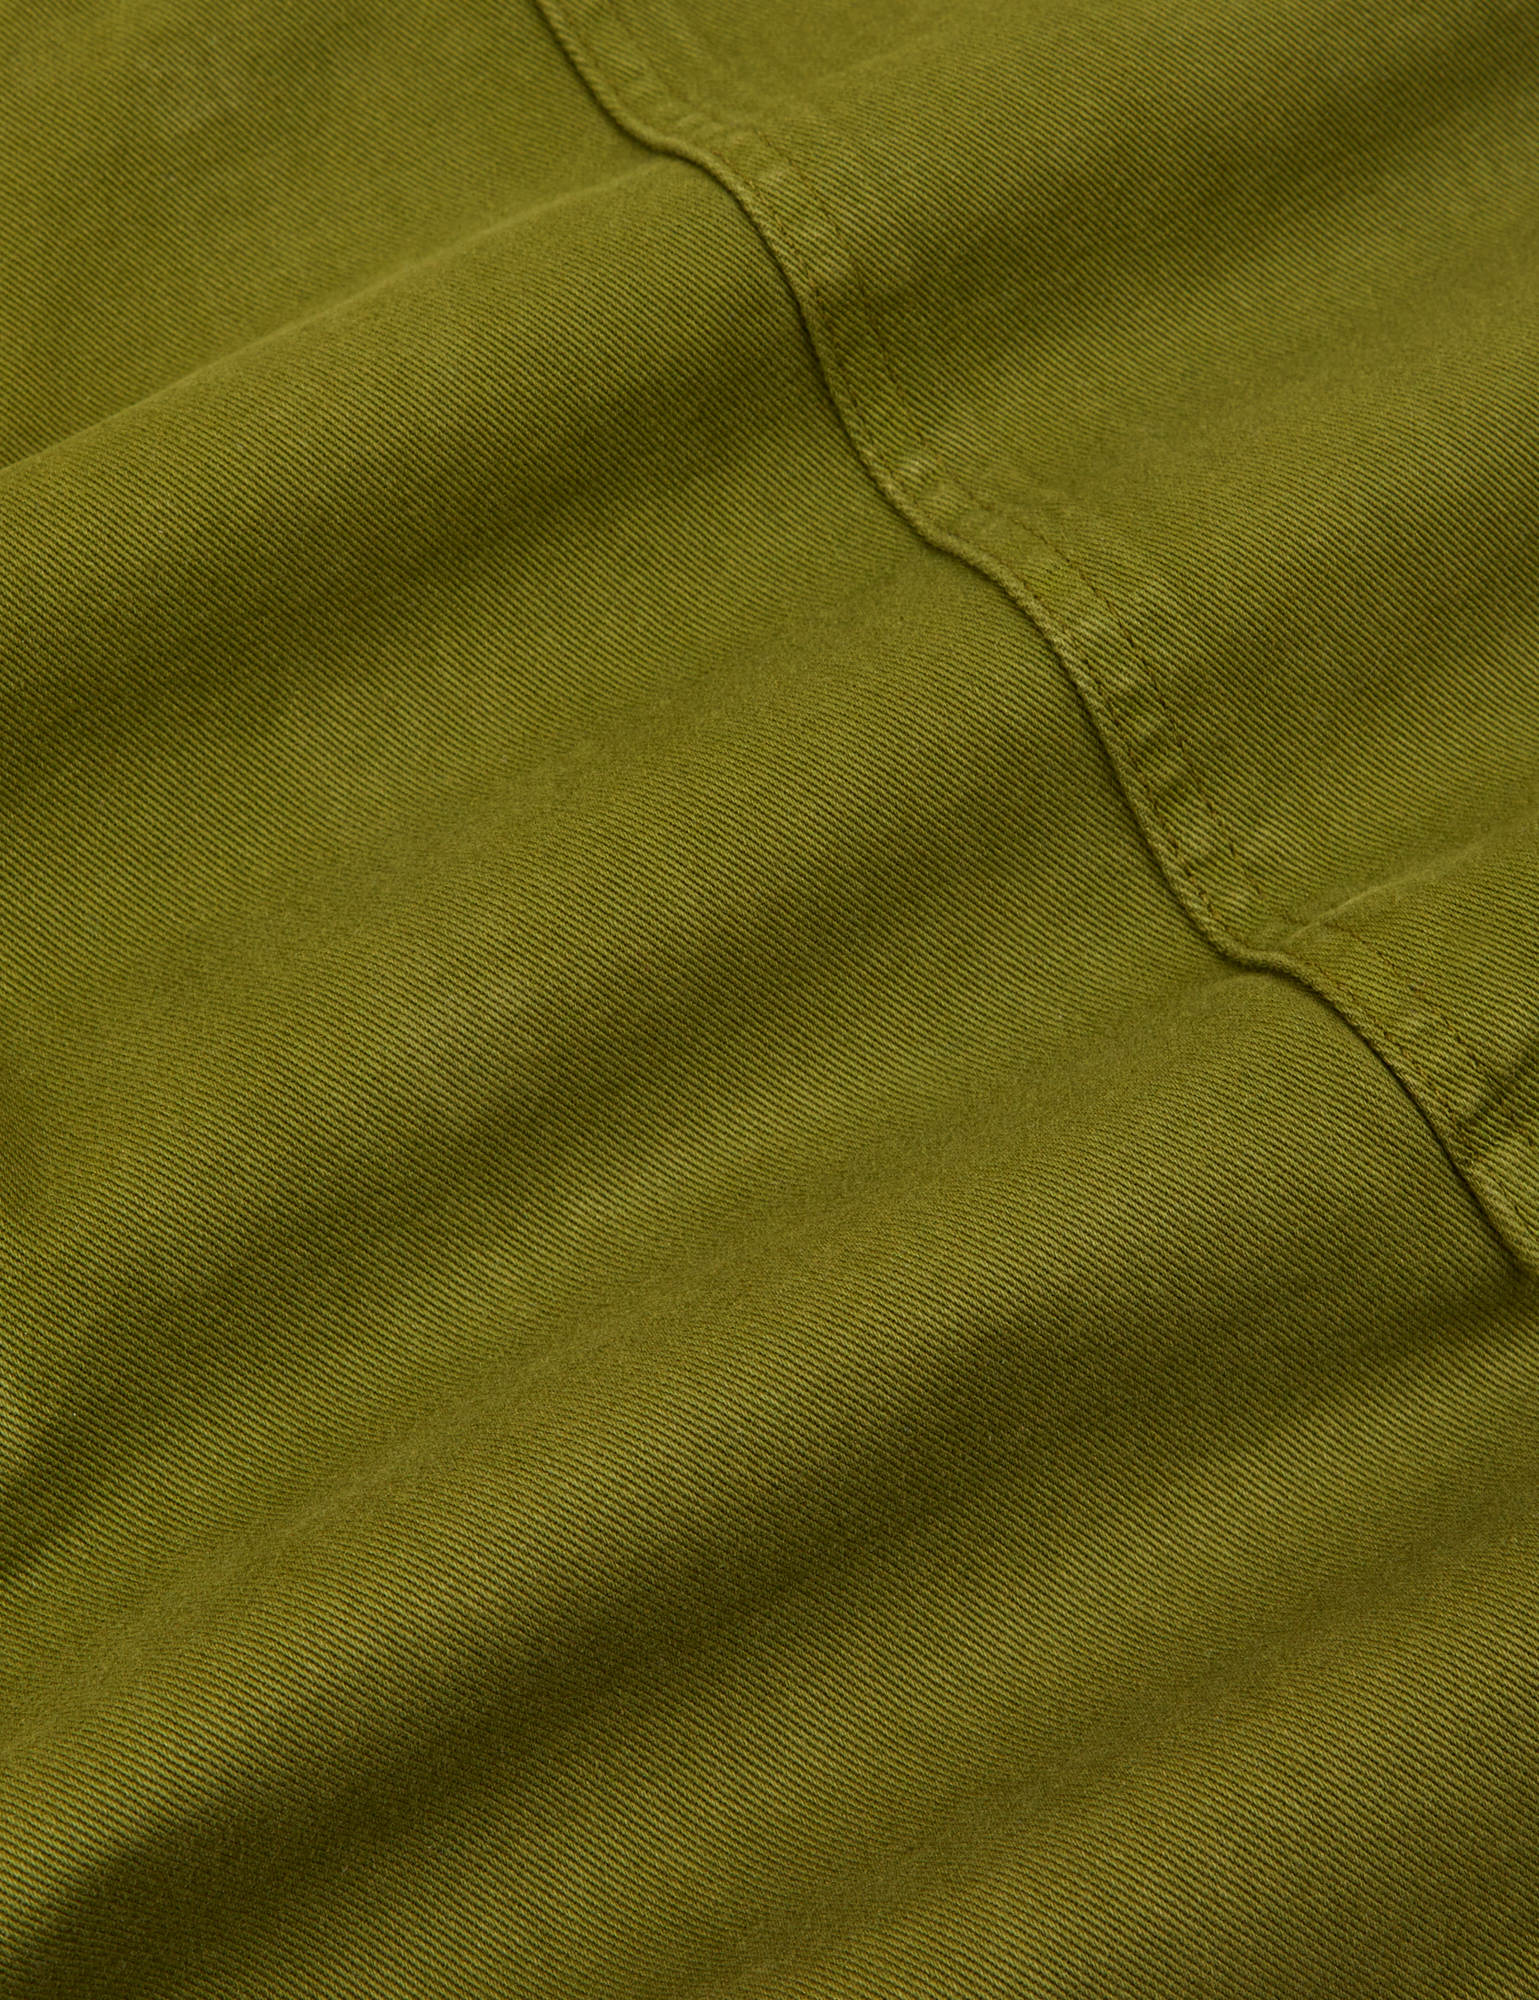 Classic Work Shorts in Summer Olive fabric detail close up